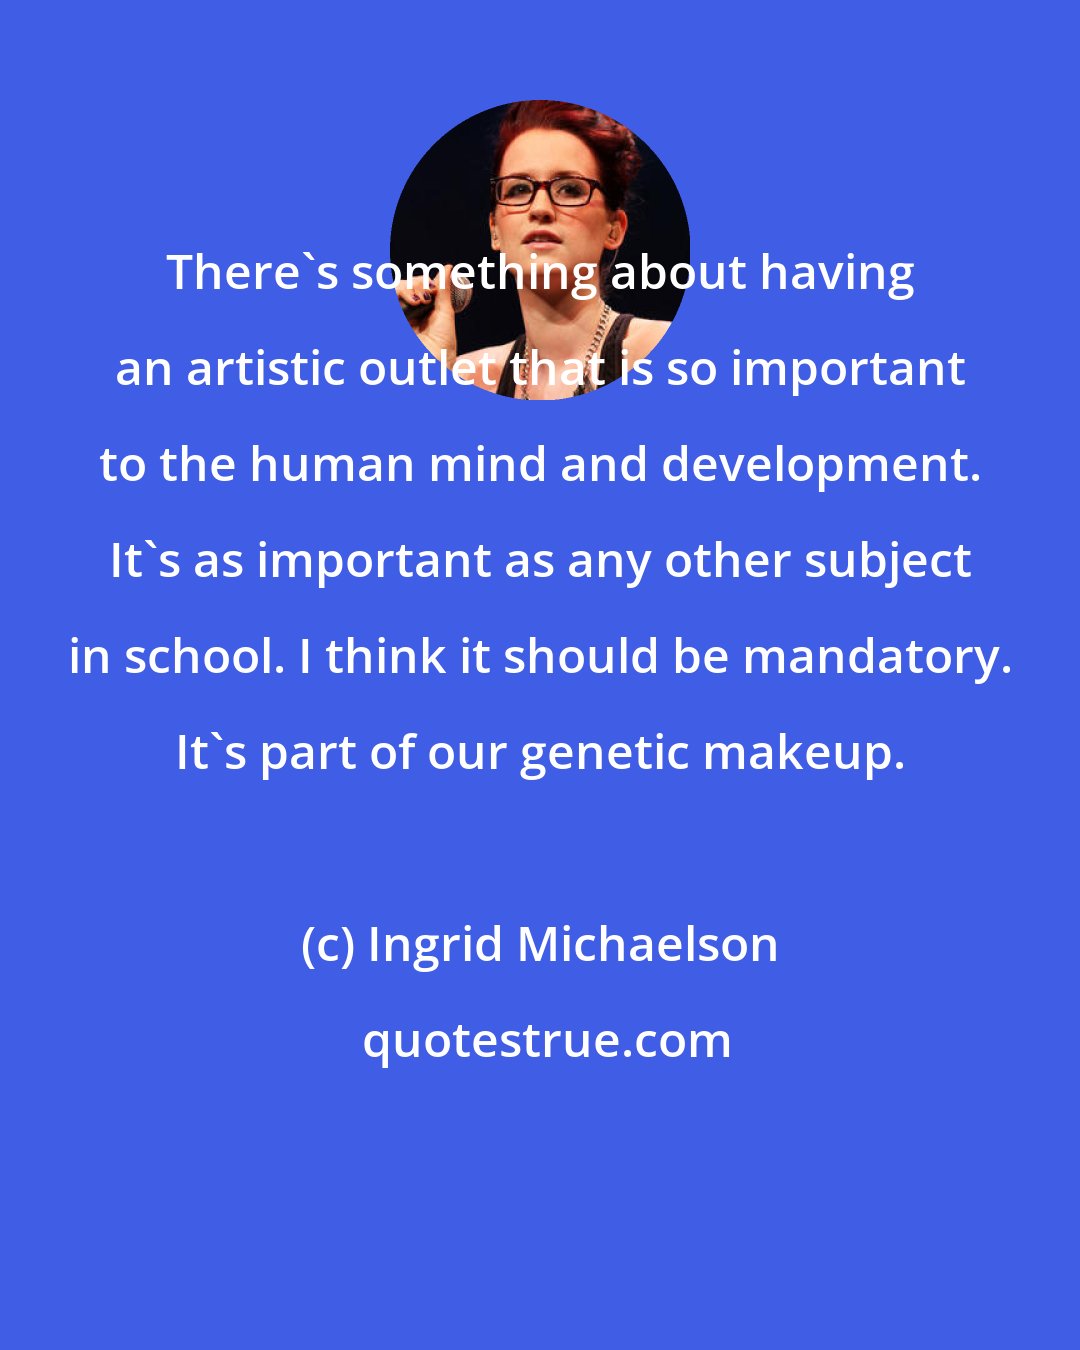 Ingrid Michaelson: There's something about having an artistic outlet that is so important to the human mind and development. It's as important as any other subject in school. I think it should be mandatory. It's part of our genetic makeup.